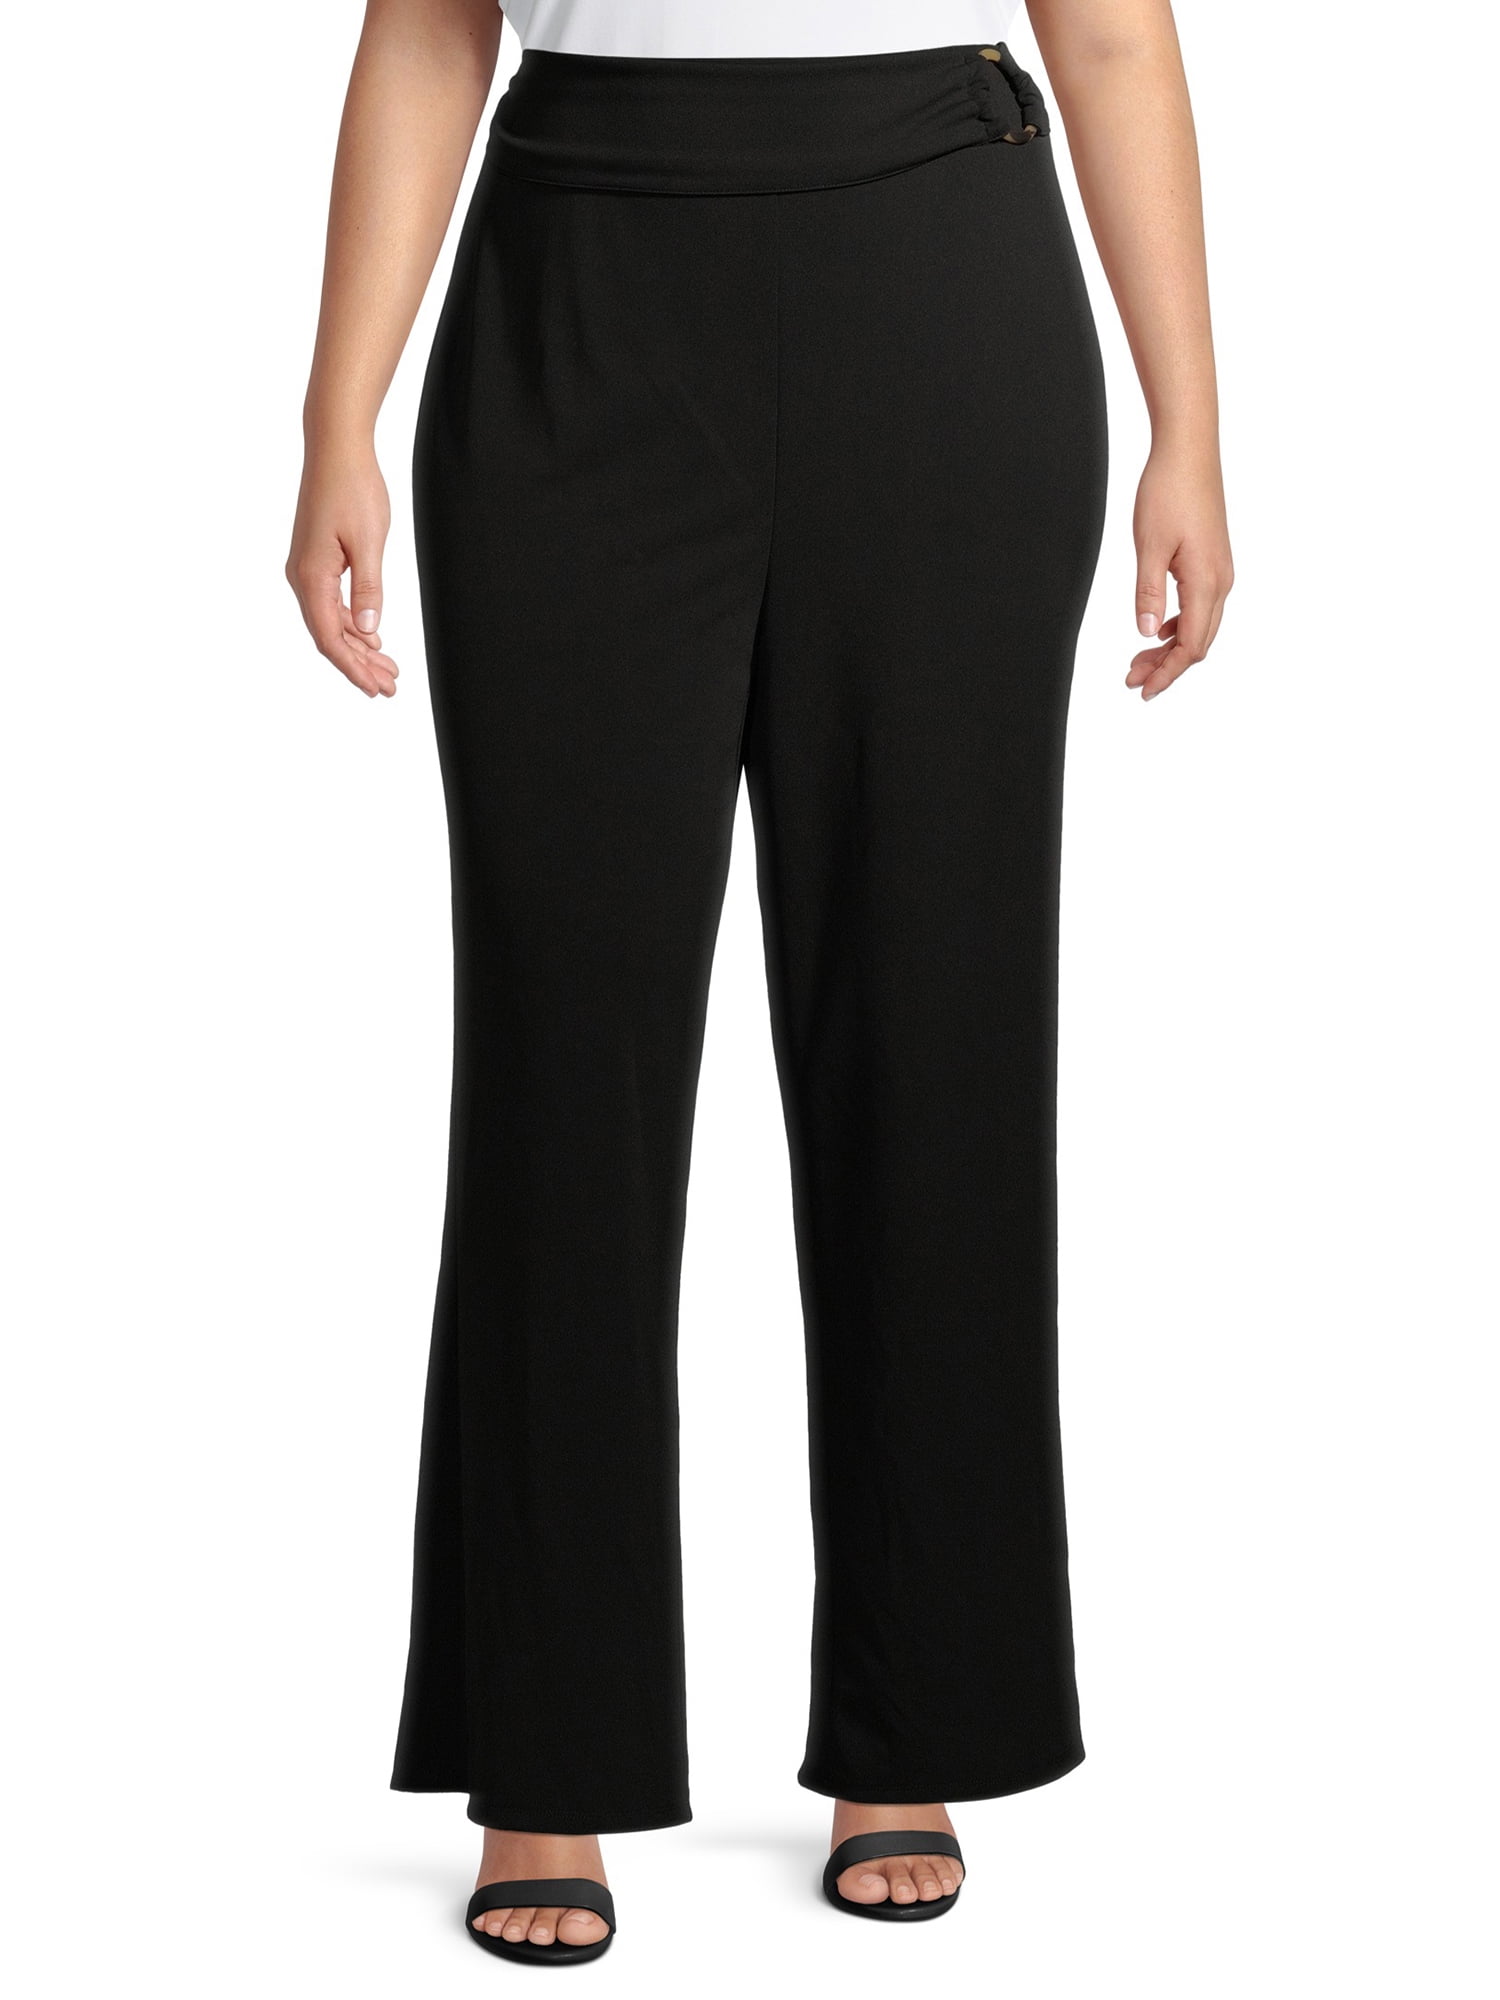 Heart N' Crush Plus Size Solid Wide Leg Pants with Foldover Waist ...